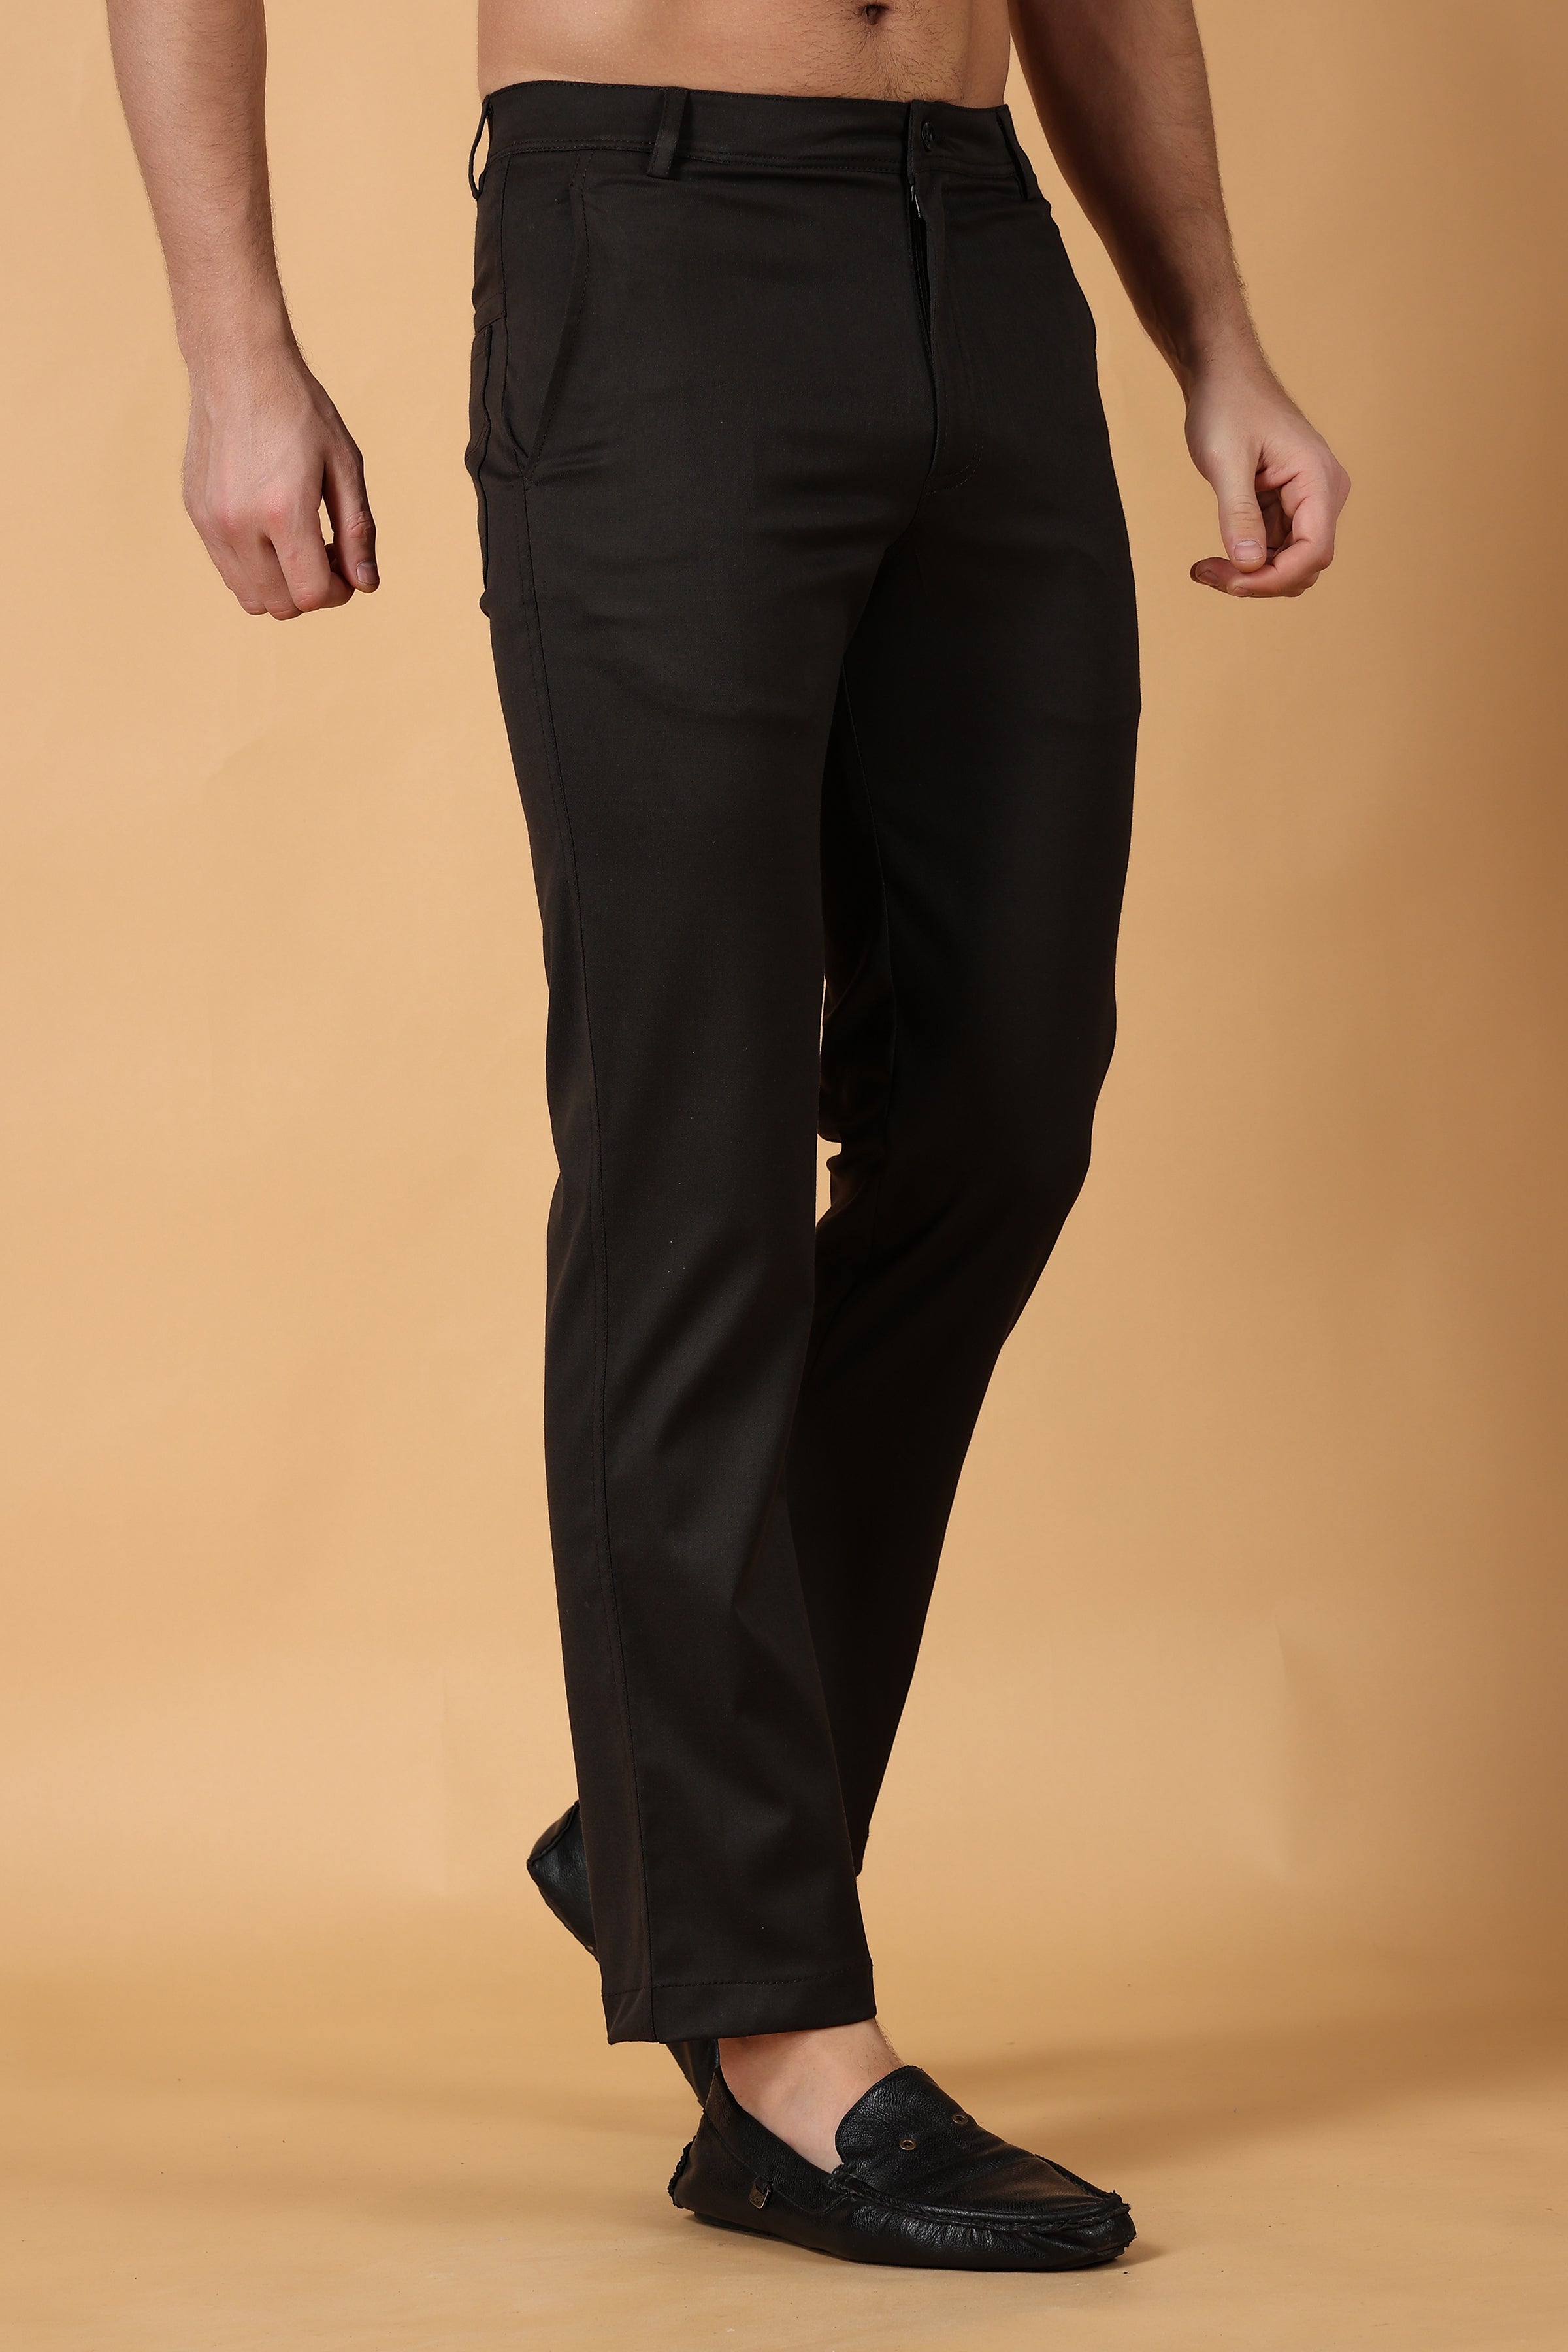 Heavy Chino Dress Pants  Made To Measure Custom Jeans For Men  Women  MakeYourOwnJeans